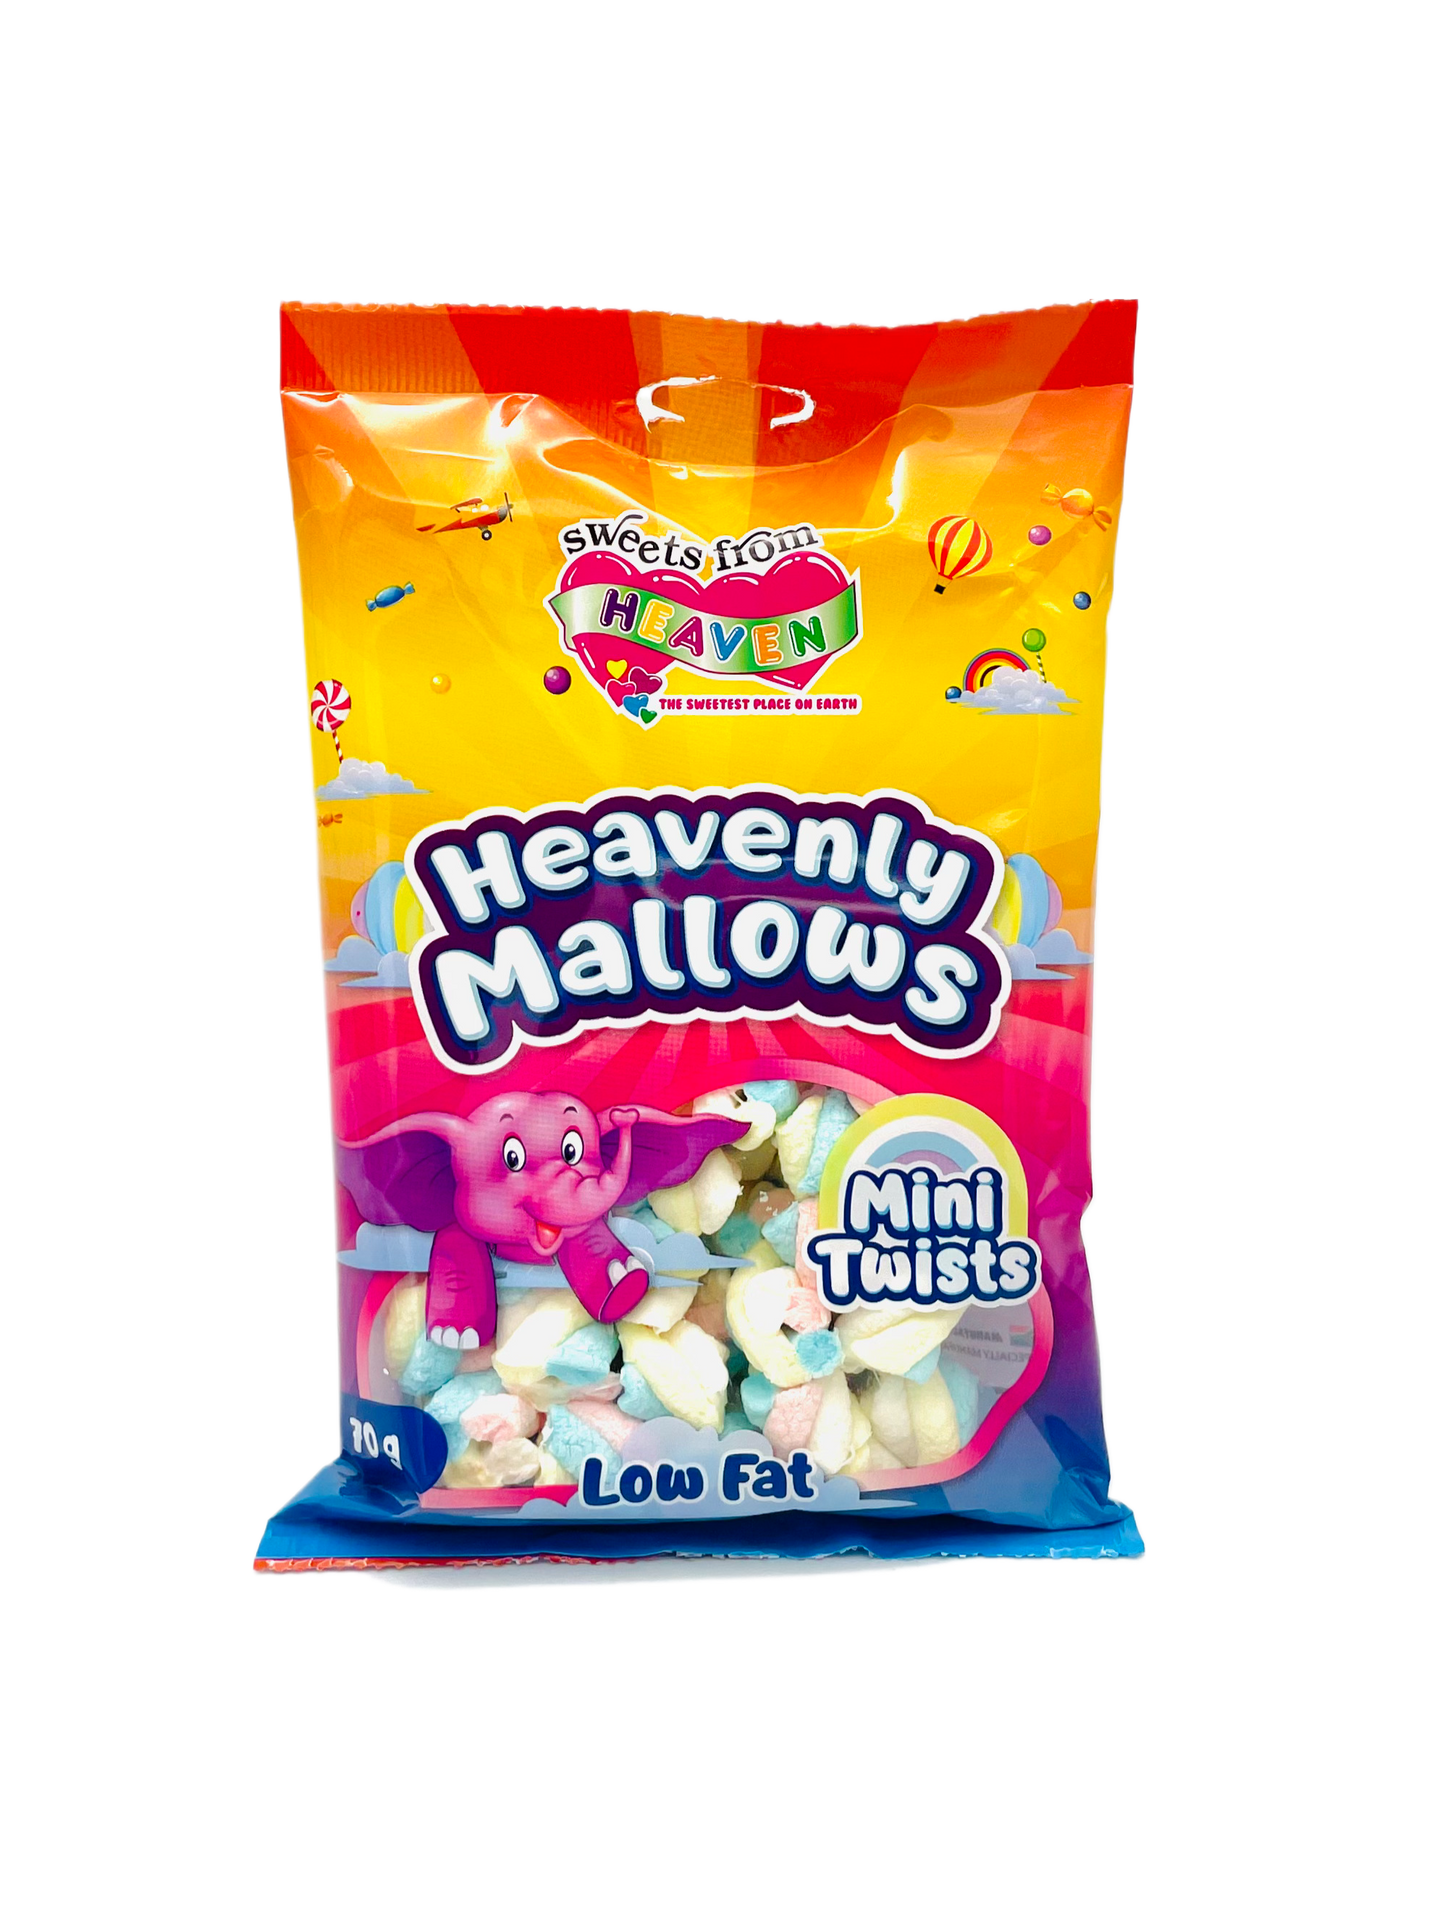 Sweets from Heaven Heavenly Mallows 70g